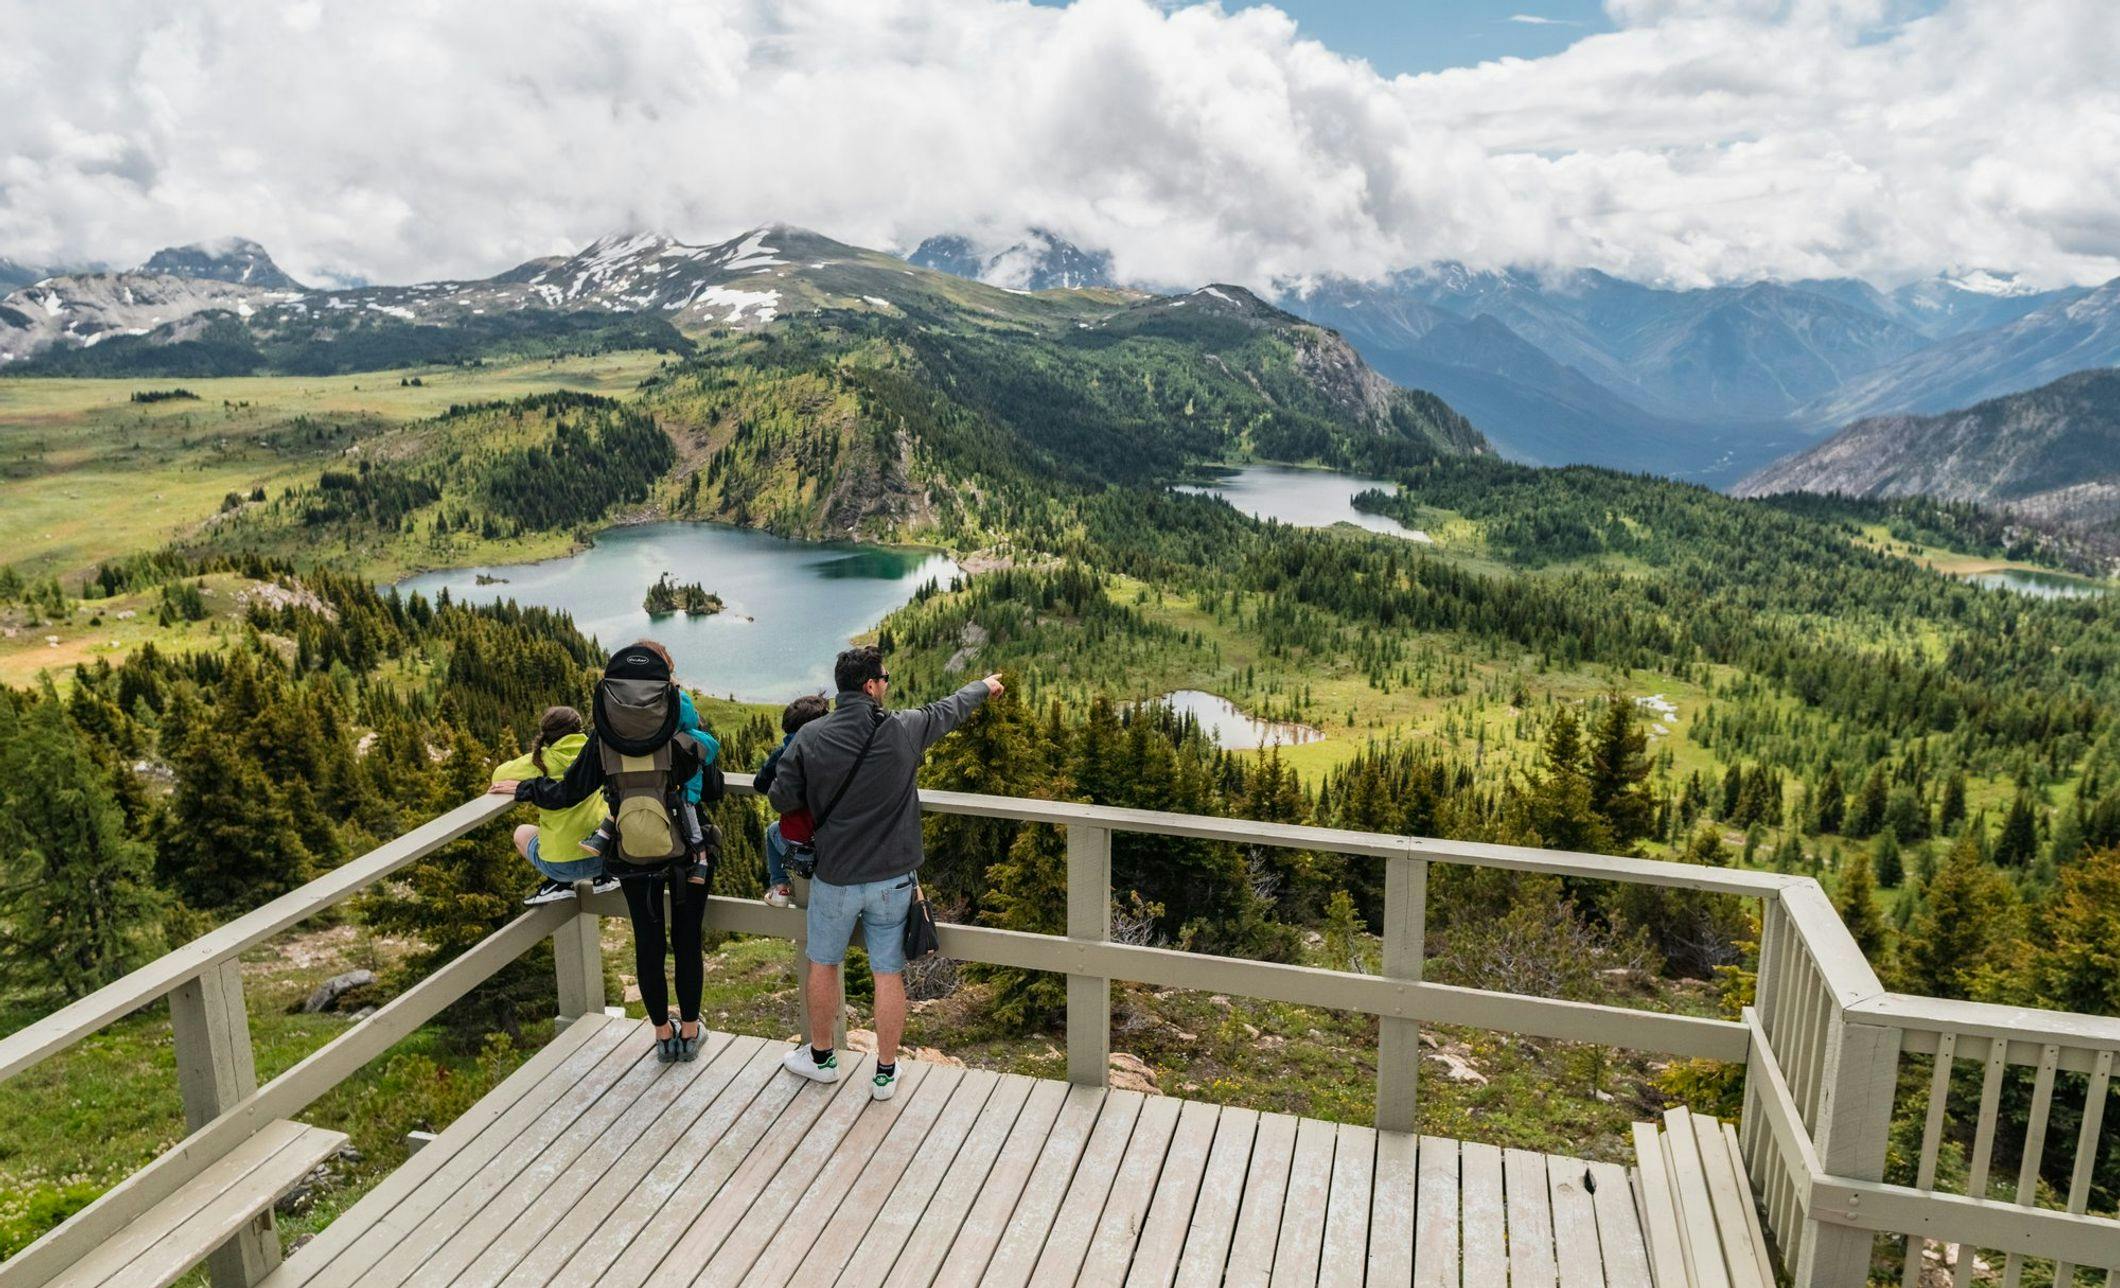 A family stands on the edge of a sightseeing platform overlooking stunning blue lakes and mountains in the alpine